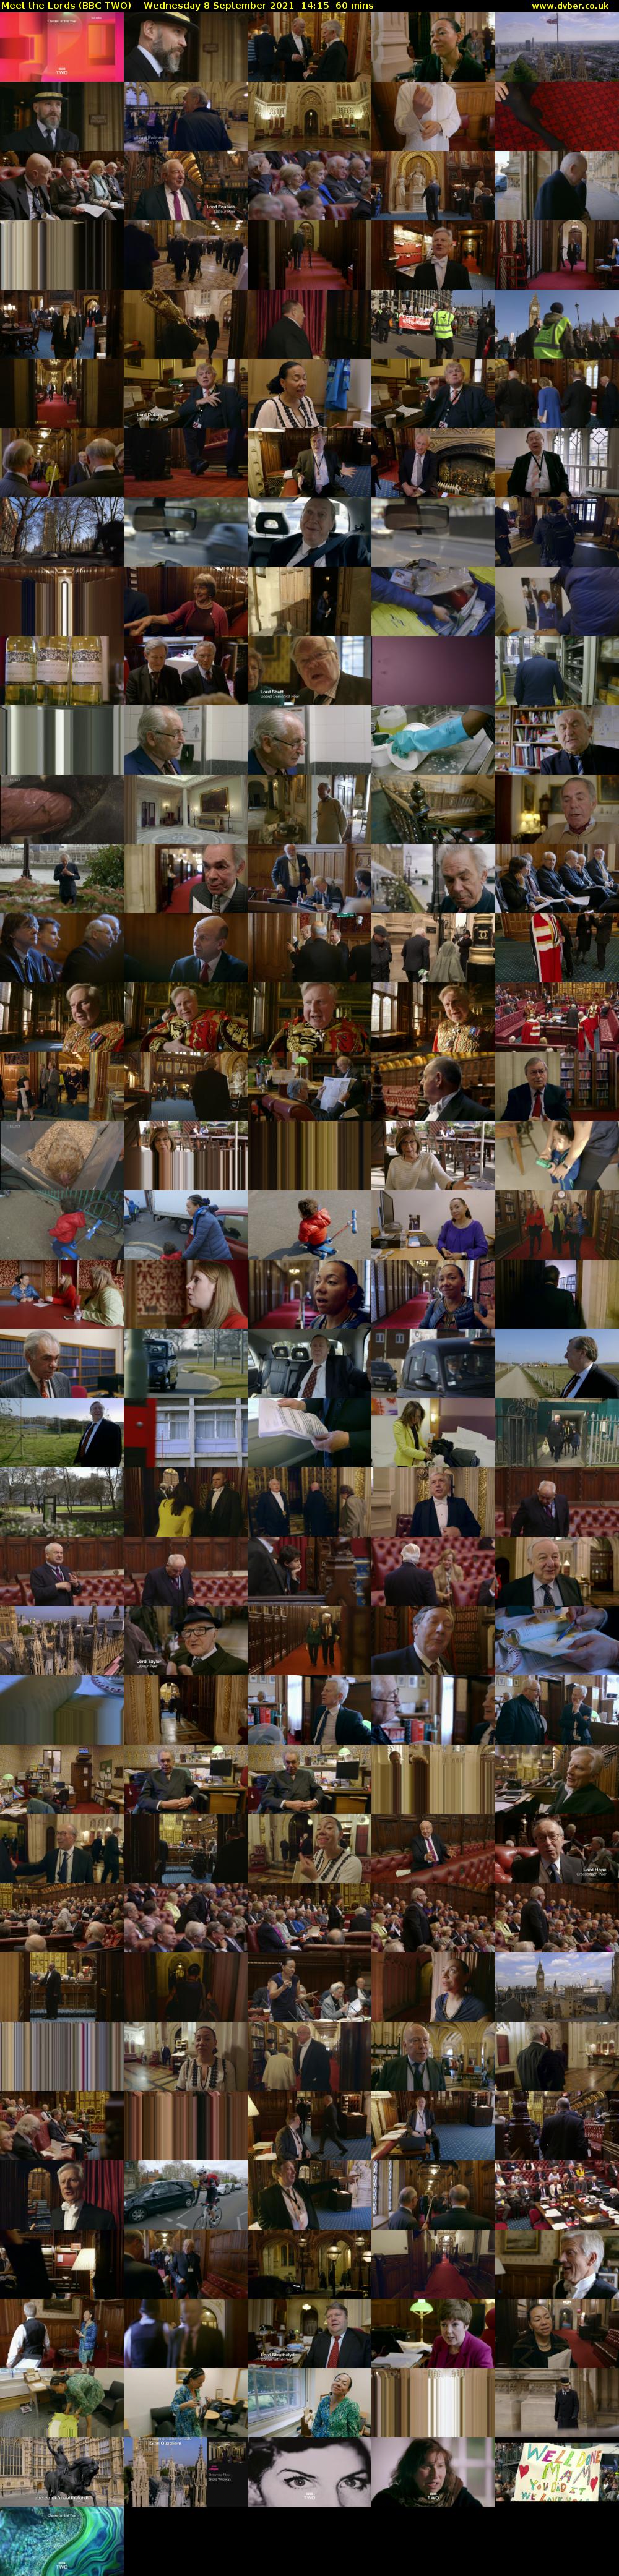 Meet the Lords (BBC TWO) Wednesday 8 September 2021 14:15 - 15:15